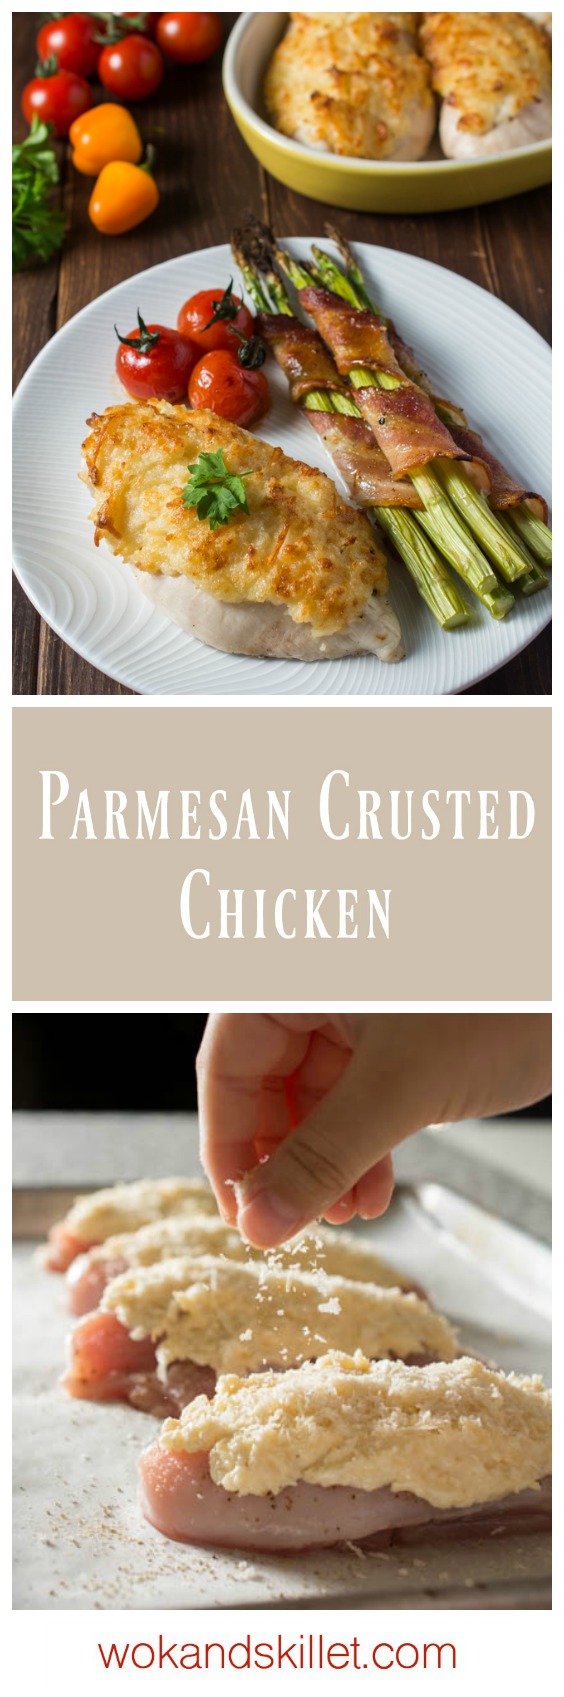 Parmesan Crusted Chicken is guaranteed to turn out super-moist and juicy every single time. Takes just minutes to prepare, which makes it perfect for a family weeknight meal yet it is elegant enough for your next romantic evening in.